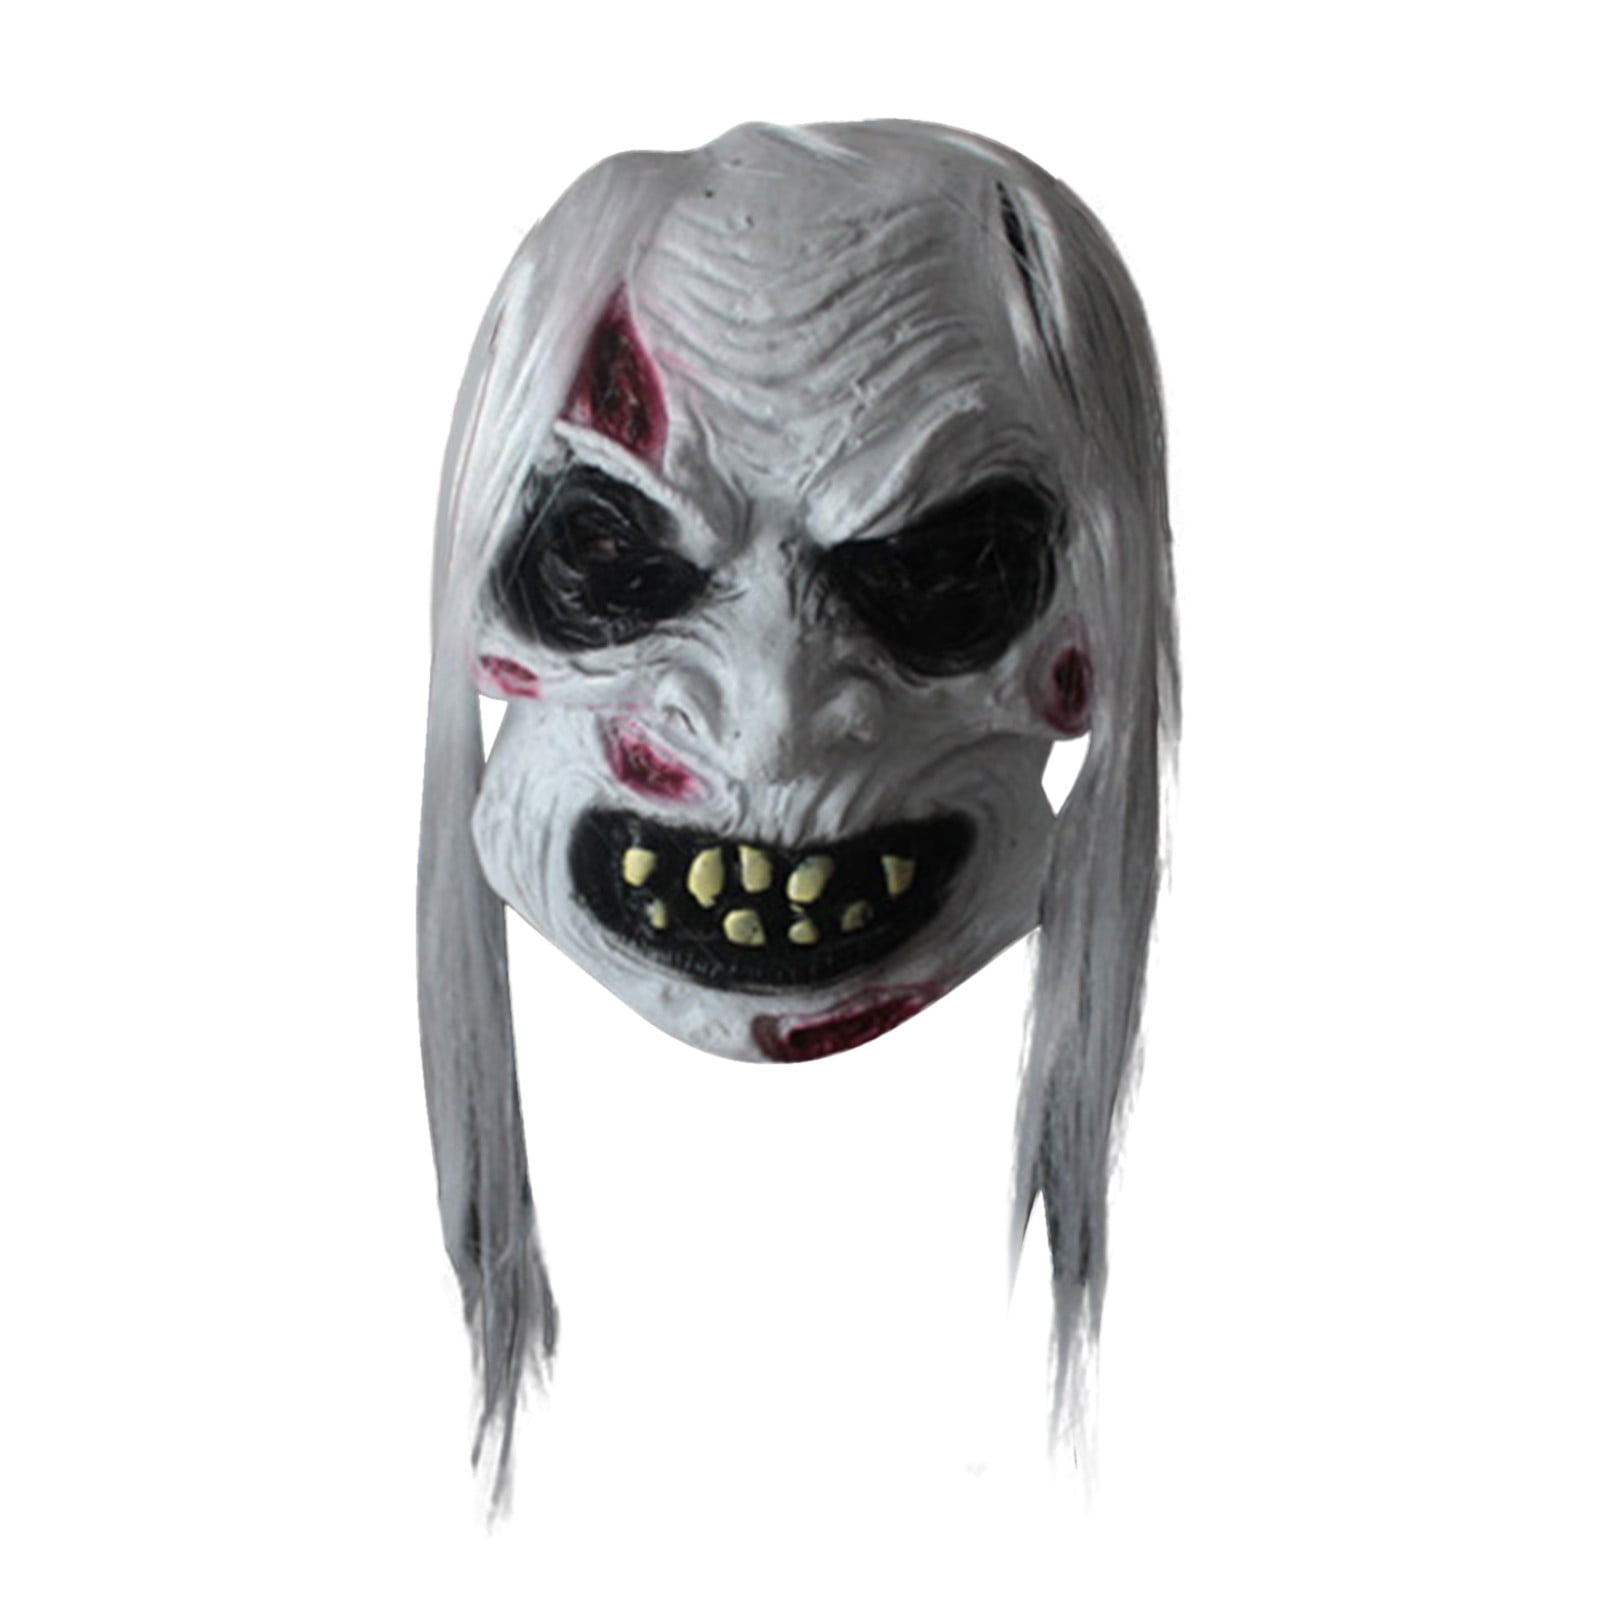 Show Mouth Breathable Elastic Cosplay Mask for Party Carnival Night 